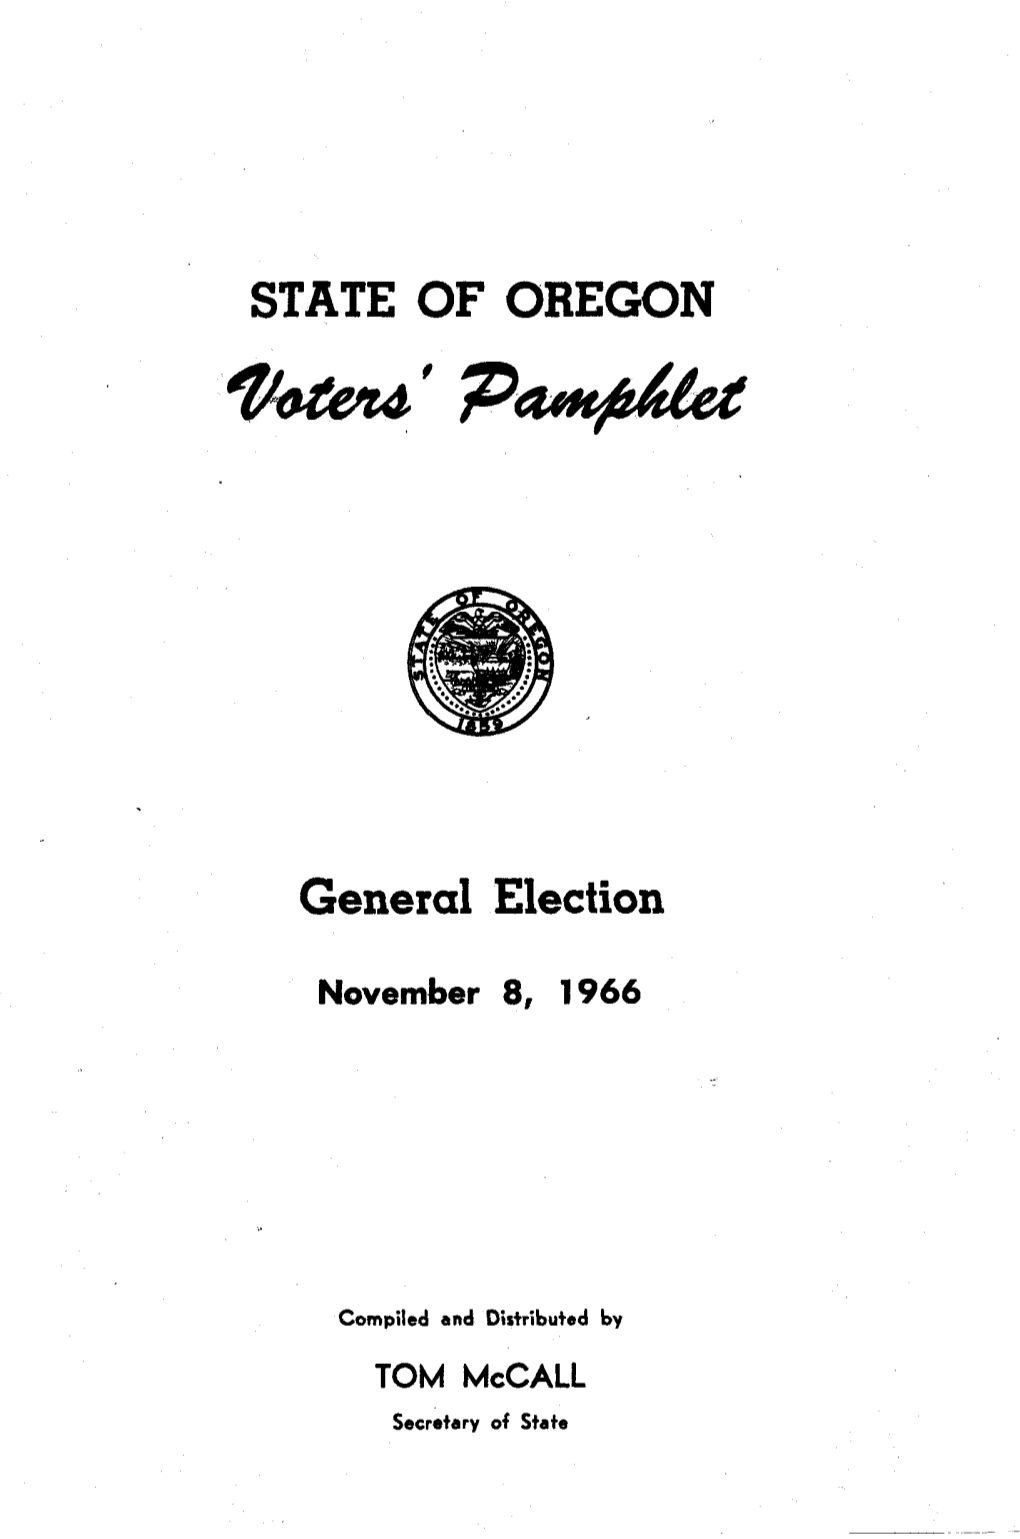 State Voters' Pamphlet